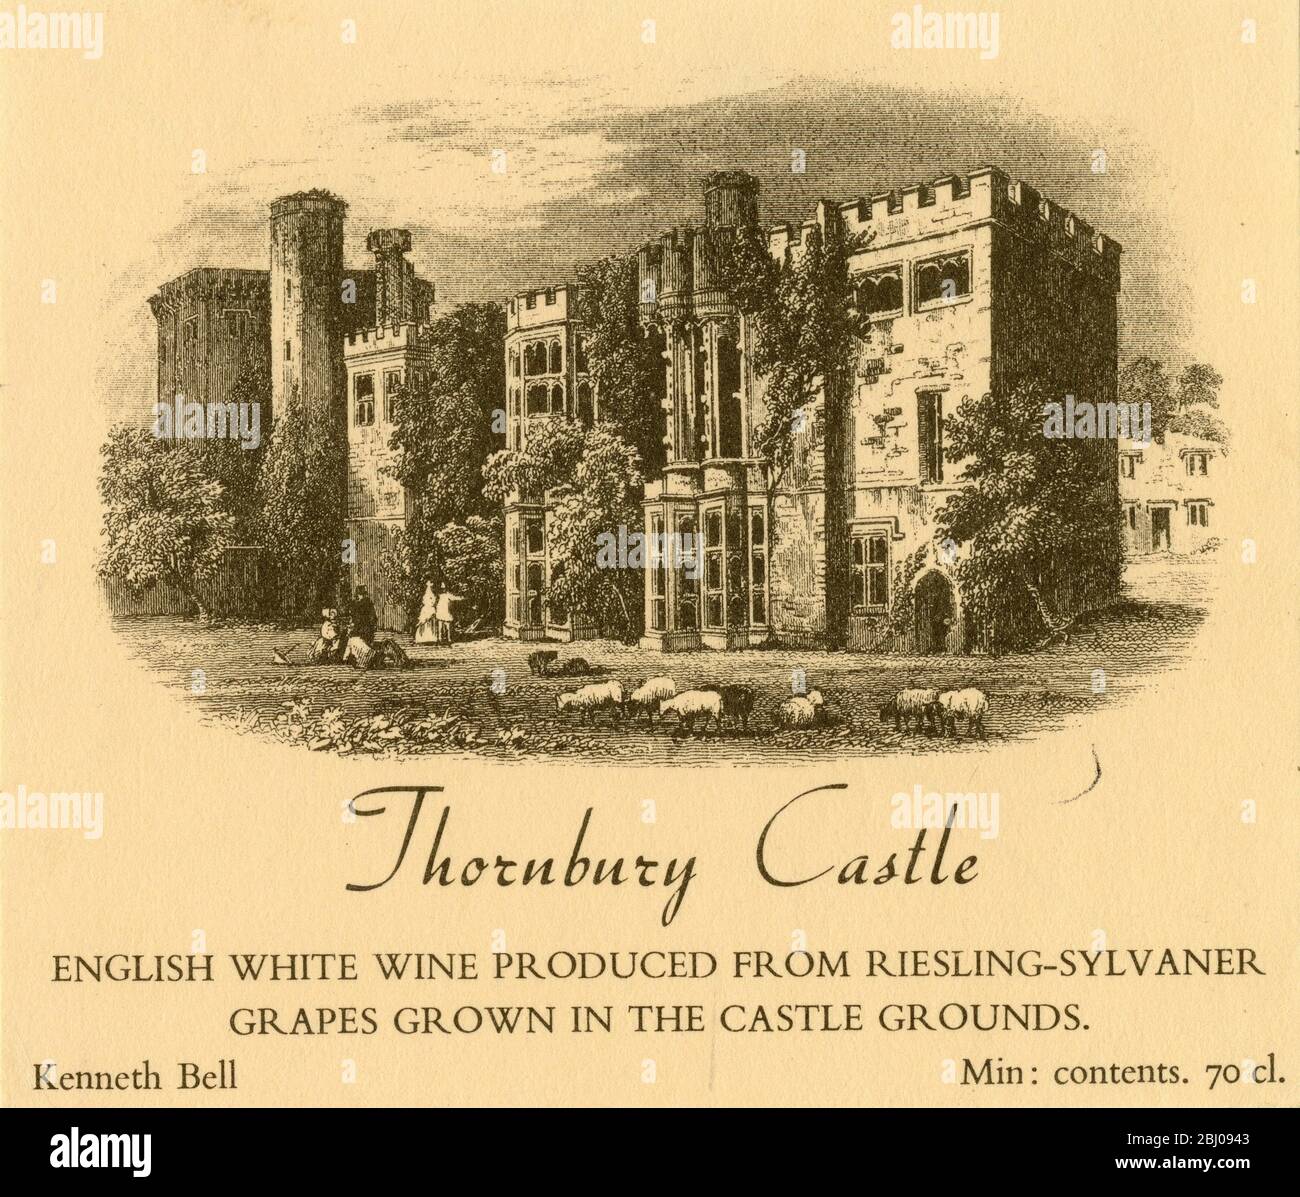 Wine Label. - Thornbury Castle. - English White Wine Produced from Riesling-Sylvaner. Grapes grown in the castle grounds. - Kenneth Bell. Stock Photo